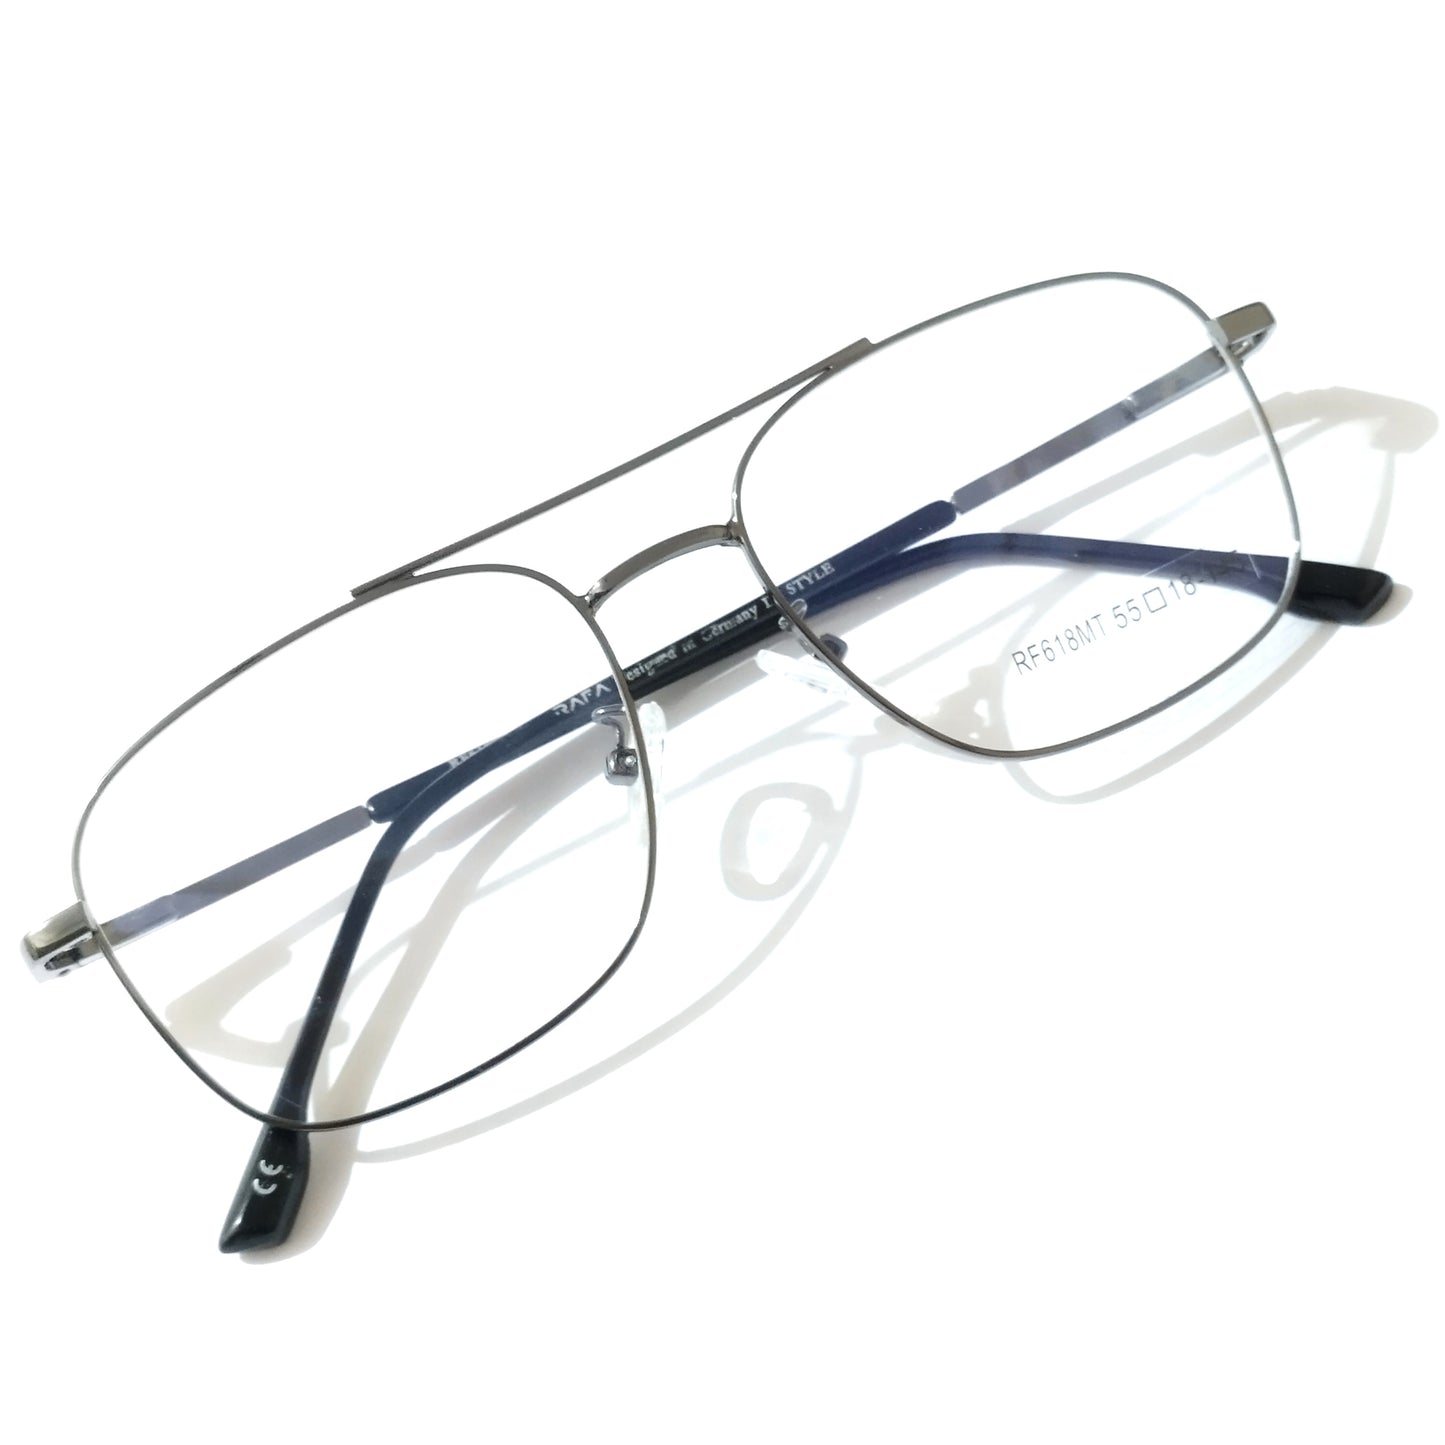 Trendy Latest Fashion Executive Square Office Wear Spectacle Frame Glasses